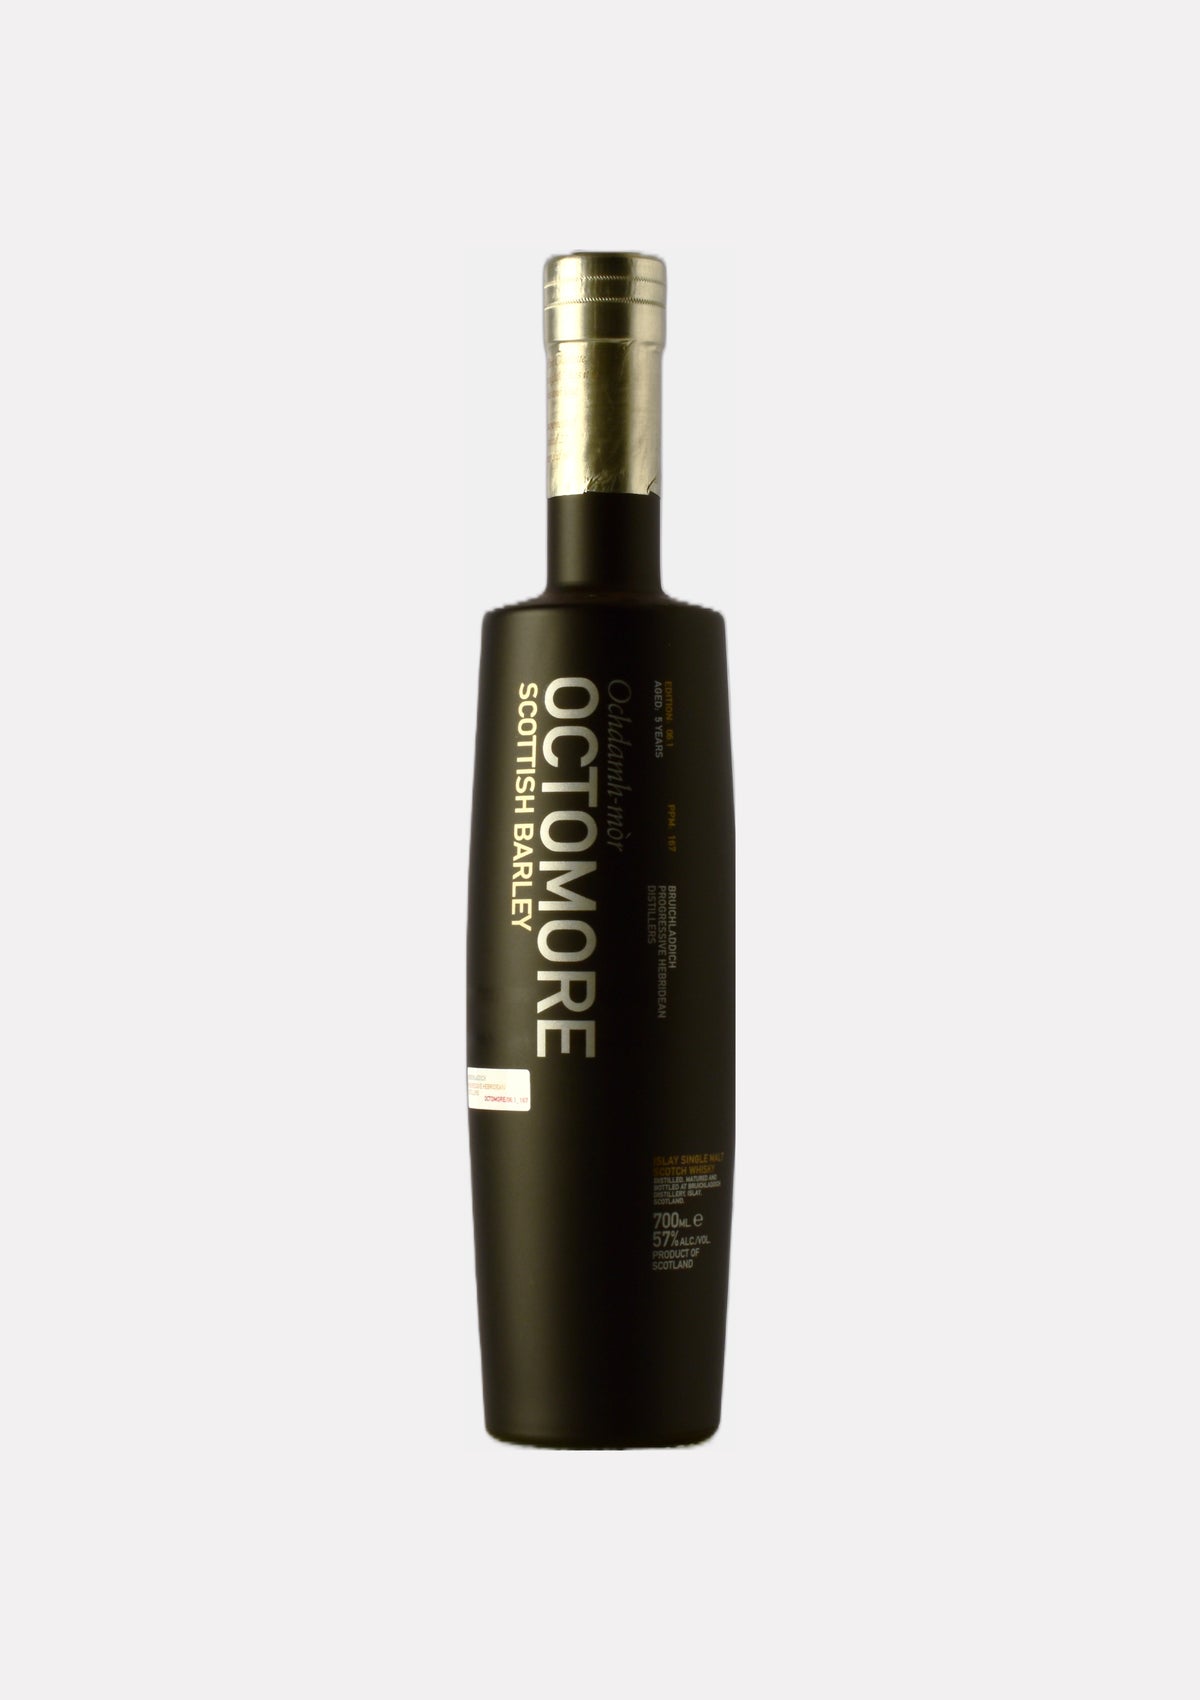 Octomore 06.1 167 ppm